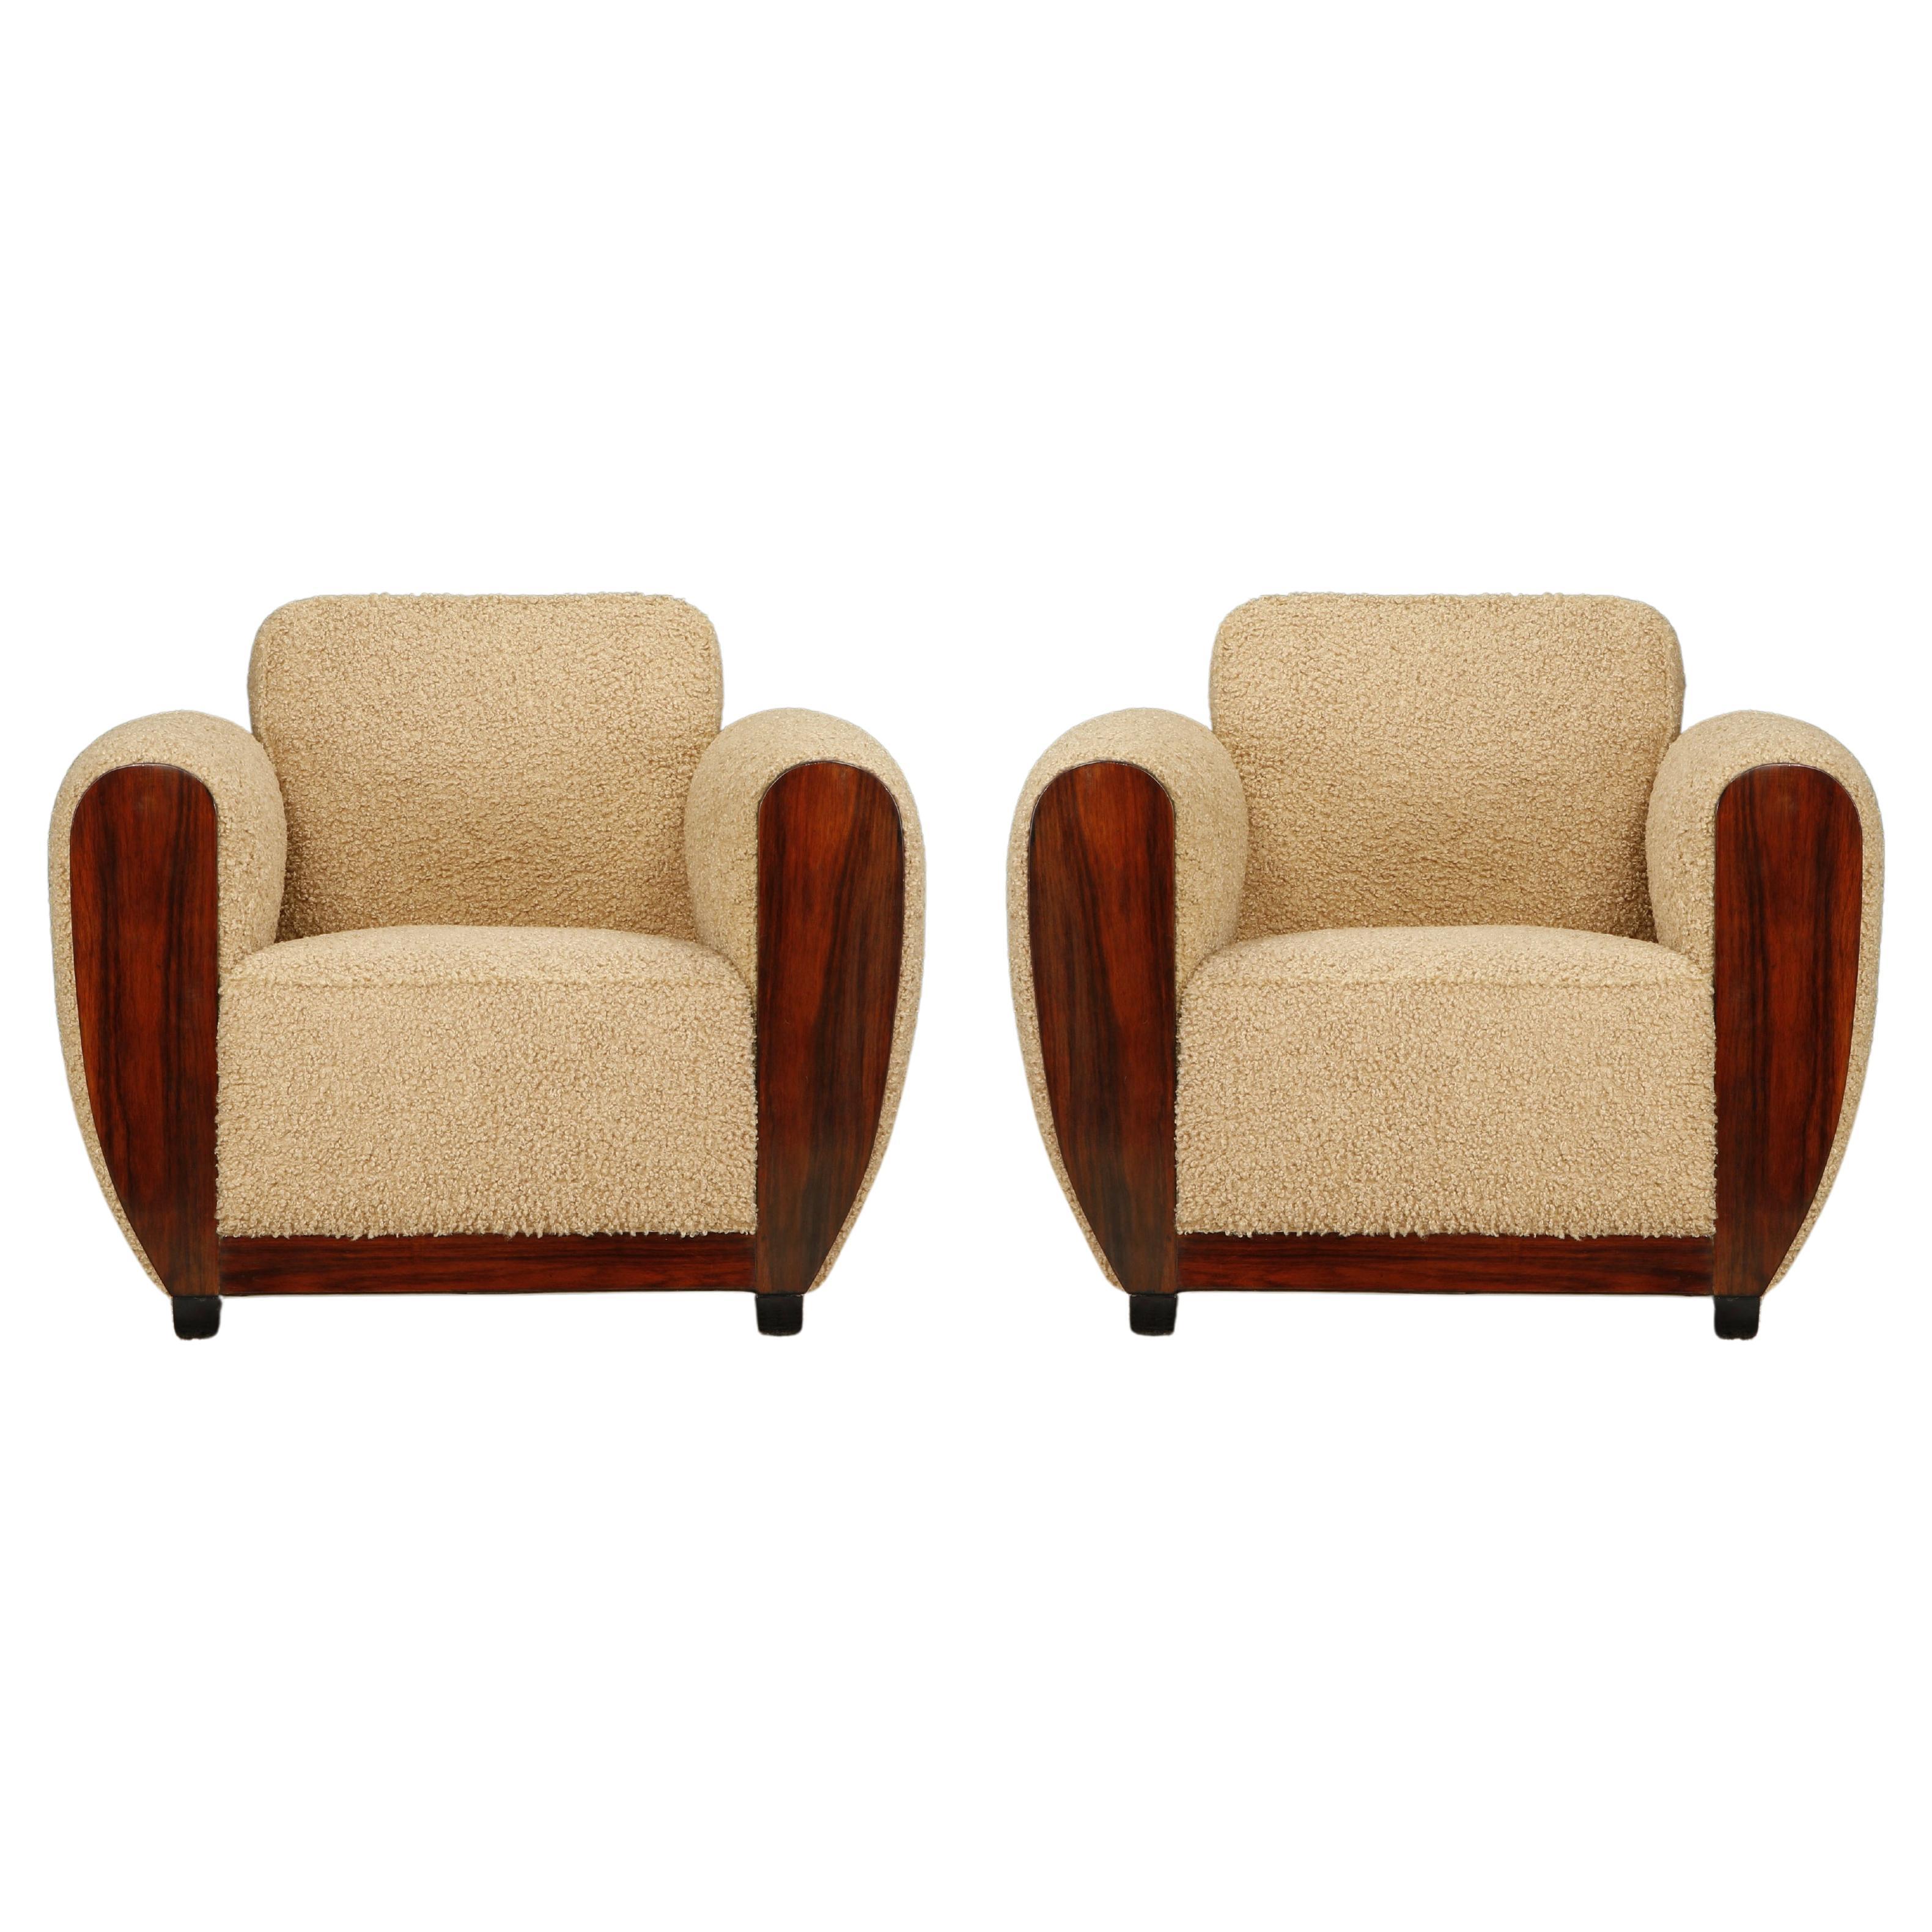 Rosewood and Teddy Bear Bouclé Art Deco Club Chairs, c 1930s, Restored